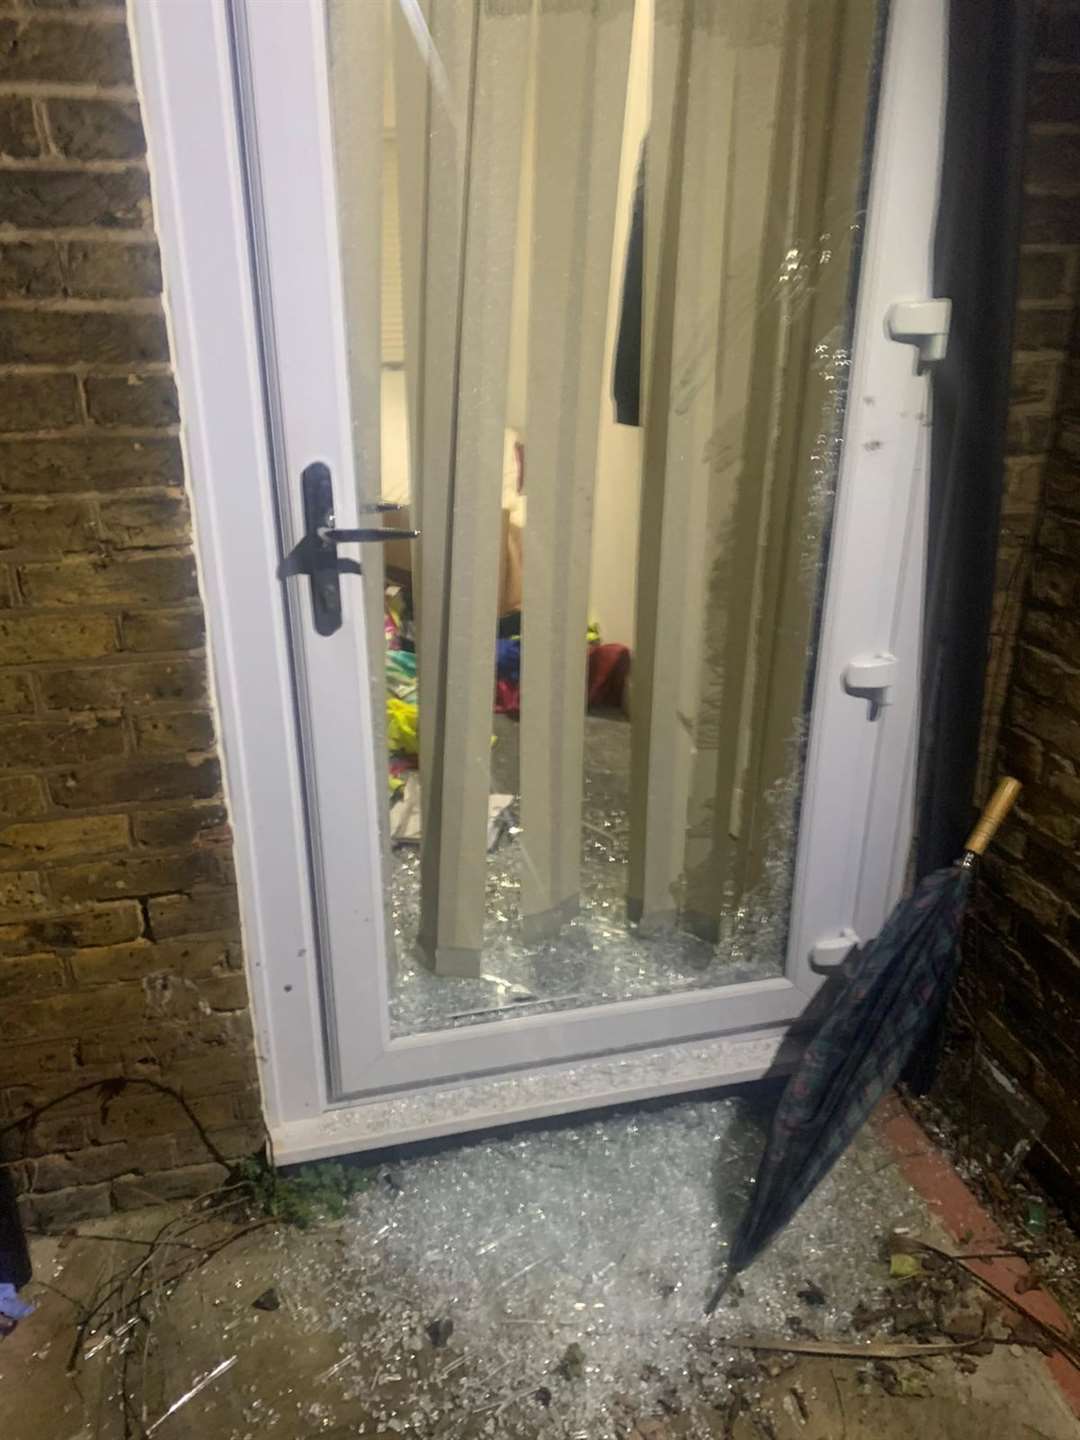 The smashed back door